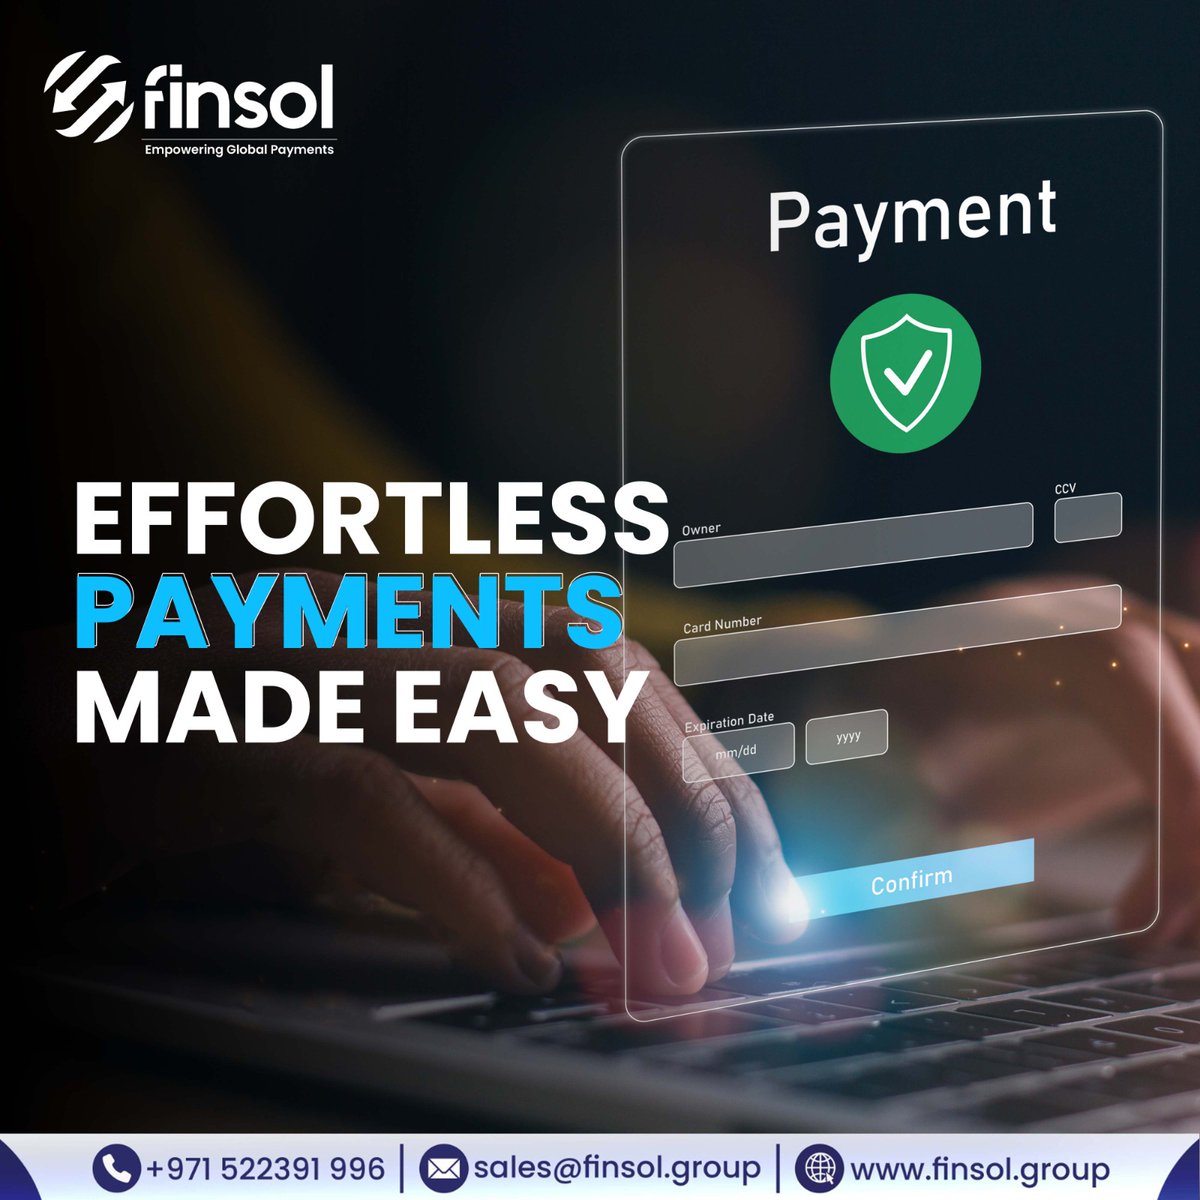 Forget checkout friction! Finsol makes B2B payments effortless. Secure, seamless transactions. Free your business to focus on what matters.
To Know More - finsol.group
.
.
.
#finsol #finsolgroup #finsolgroupllc #paymentsolution #paymentgateway #payouts #payin